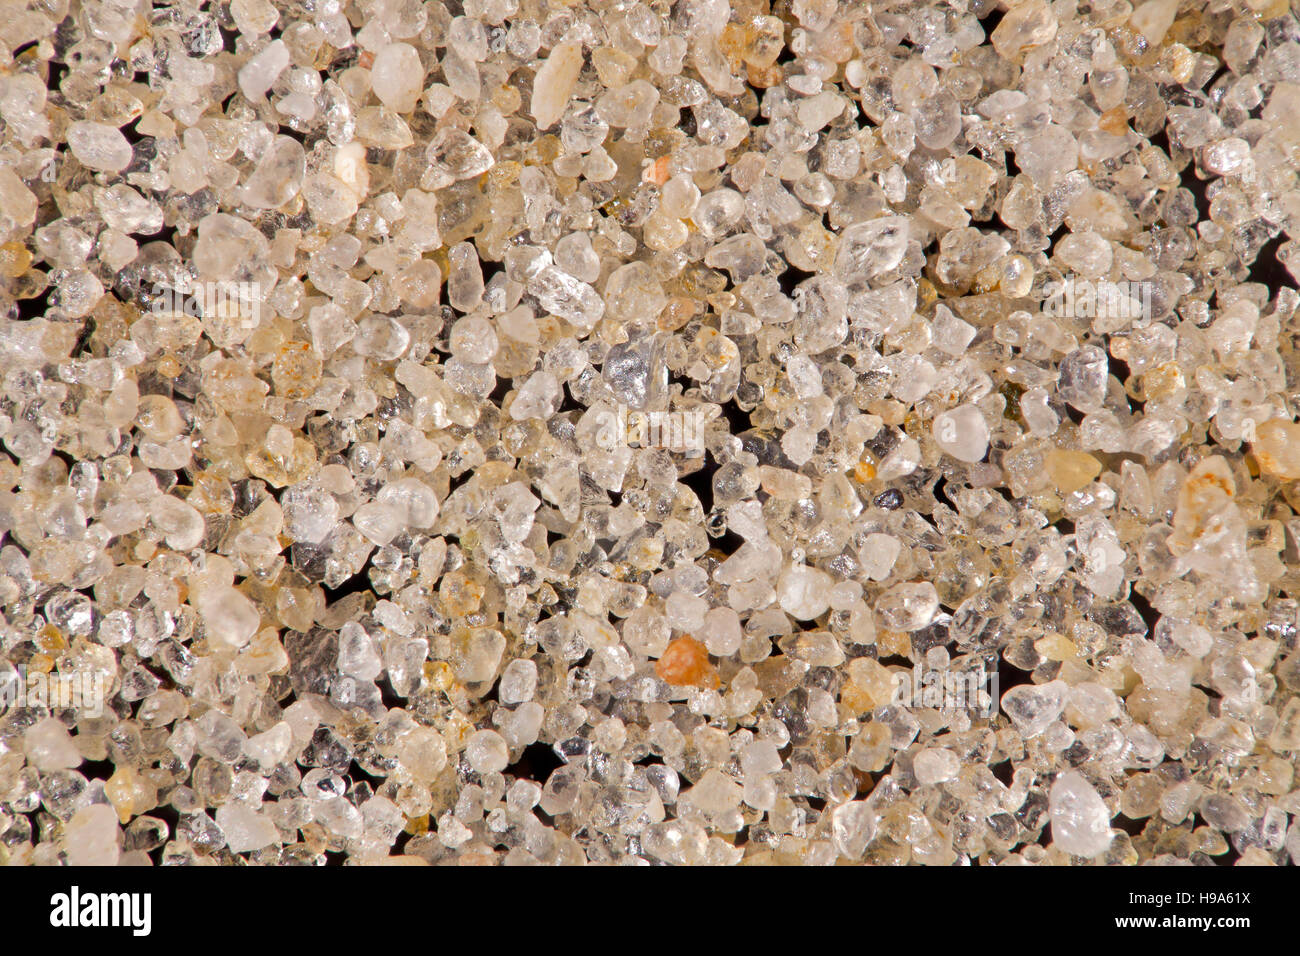 Sand from Föhr island Germany, high macro view showing general grain structure Stock Photo